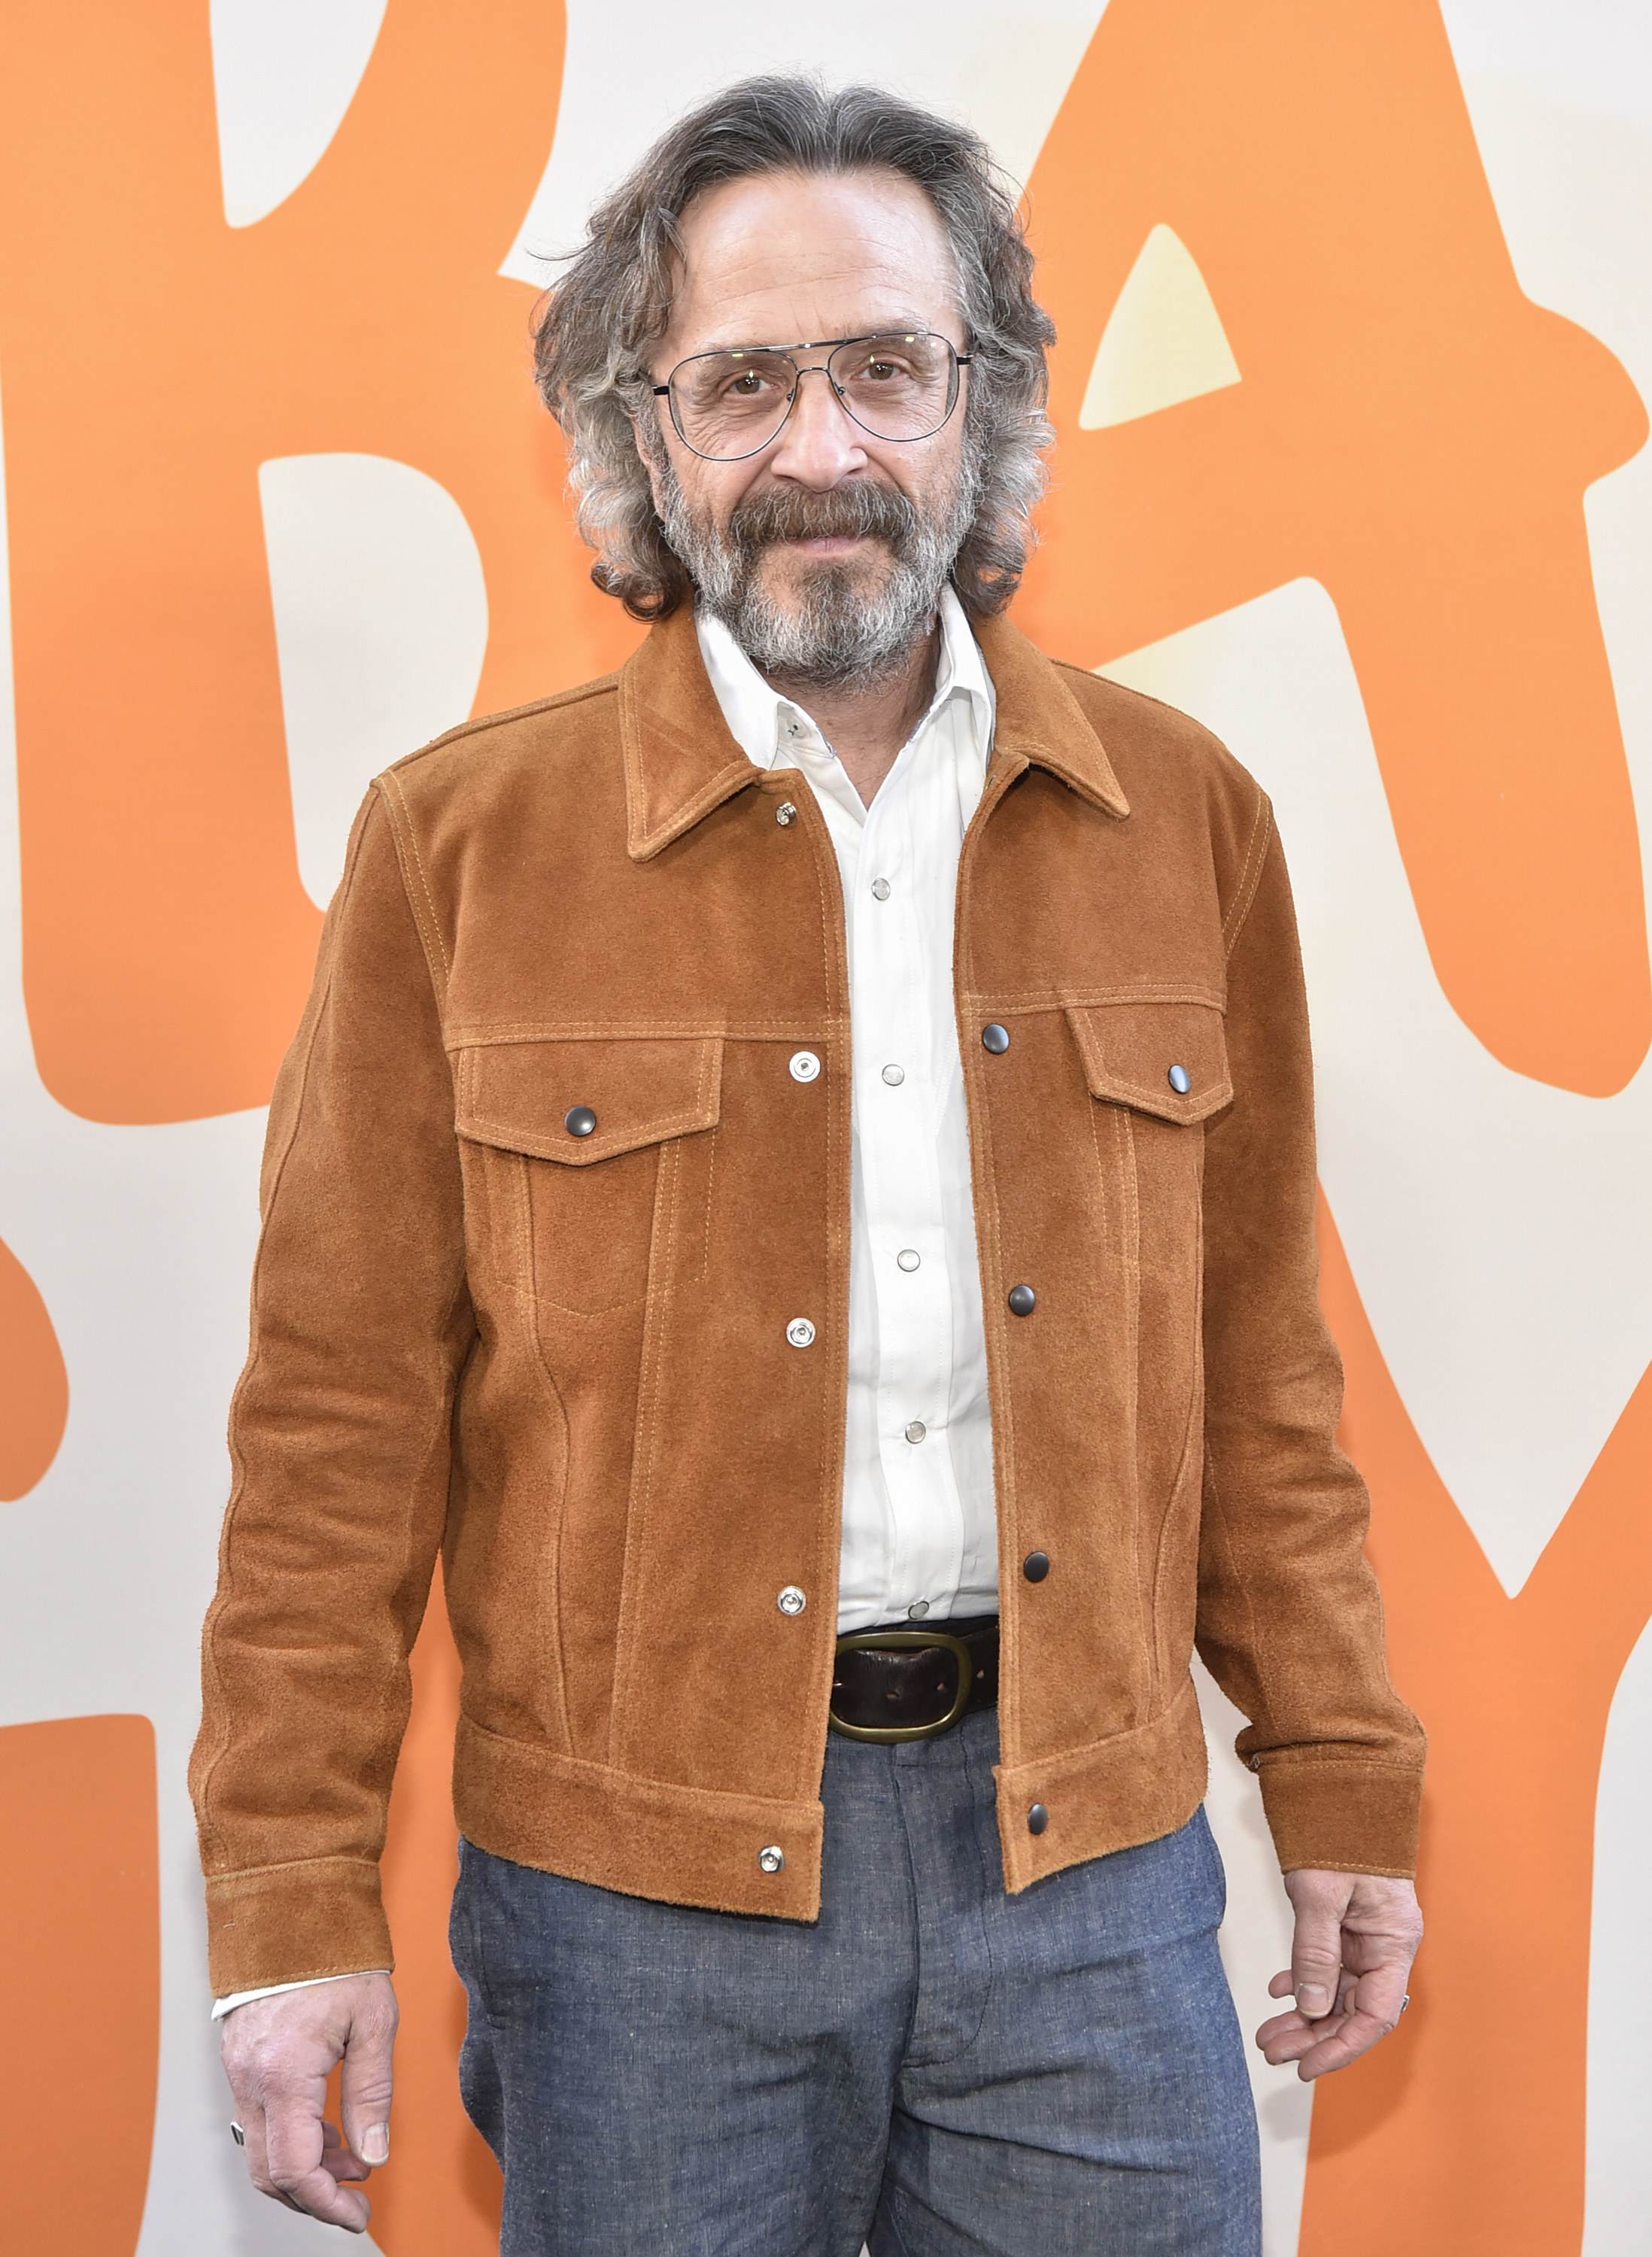 Marc Maron on the red carpet